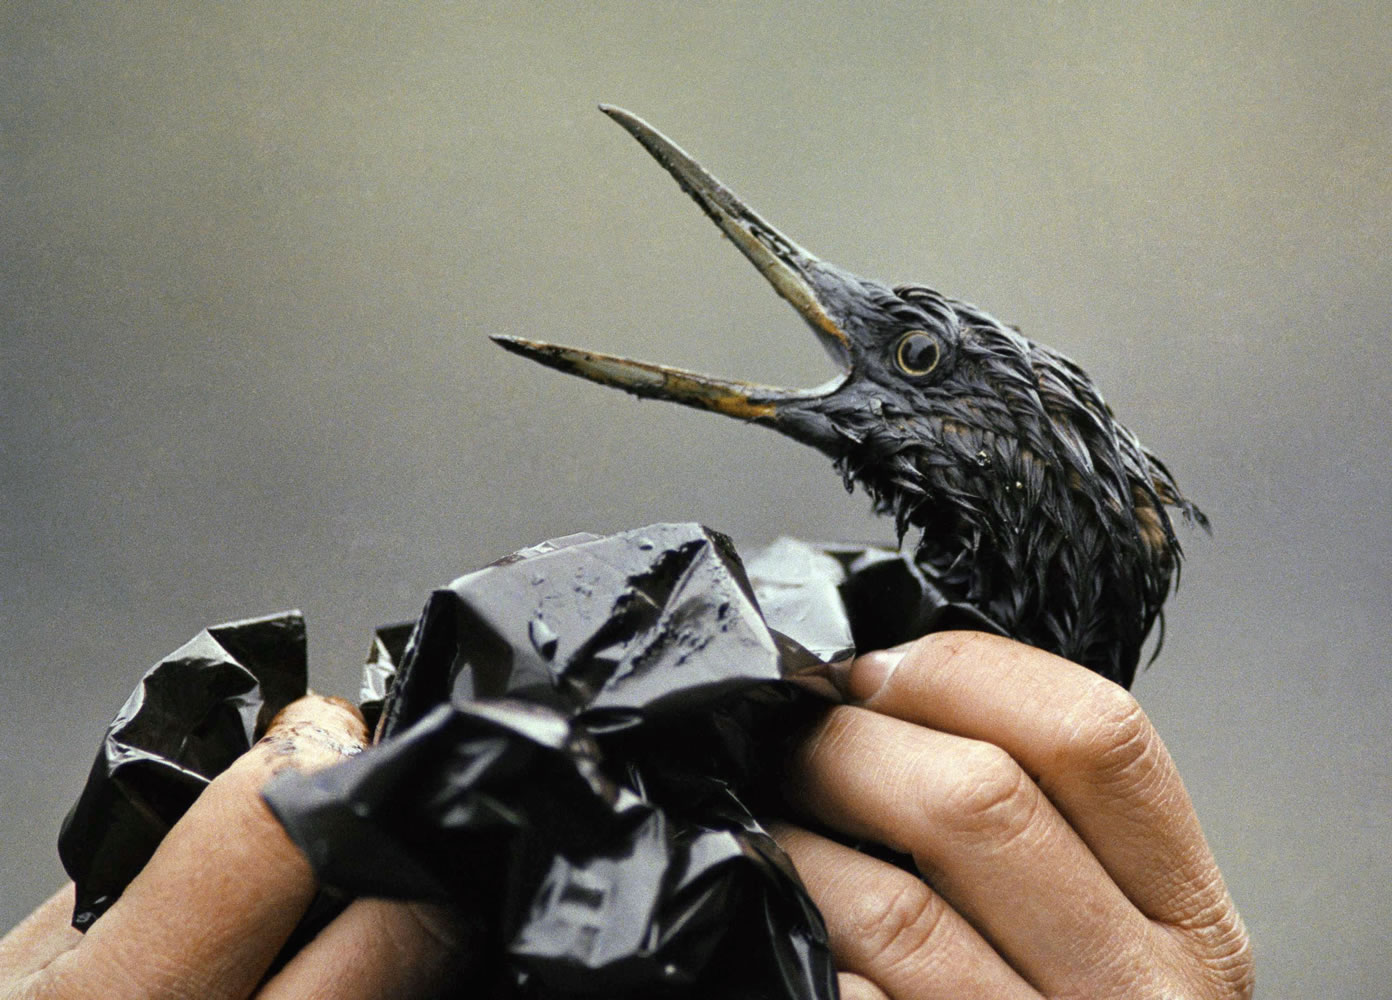 An oil-soaked bird is examined on an island in Prince William Sound, Alaska, in April 1989, in the aftermath of the March 24, 1989, spill of millions of gallons of crude oil.